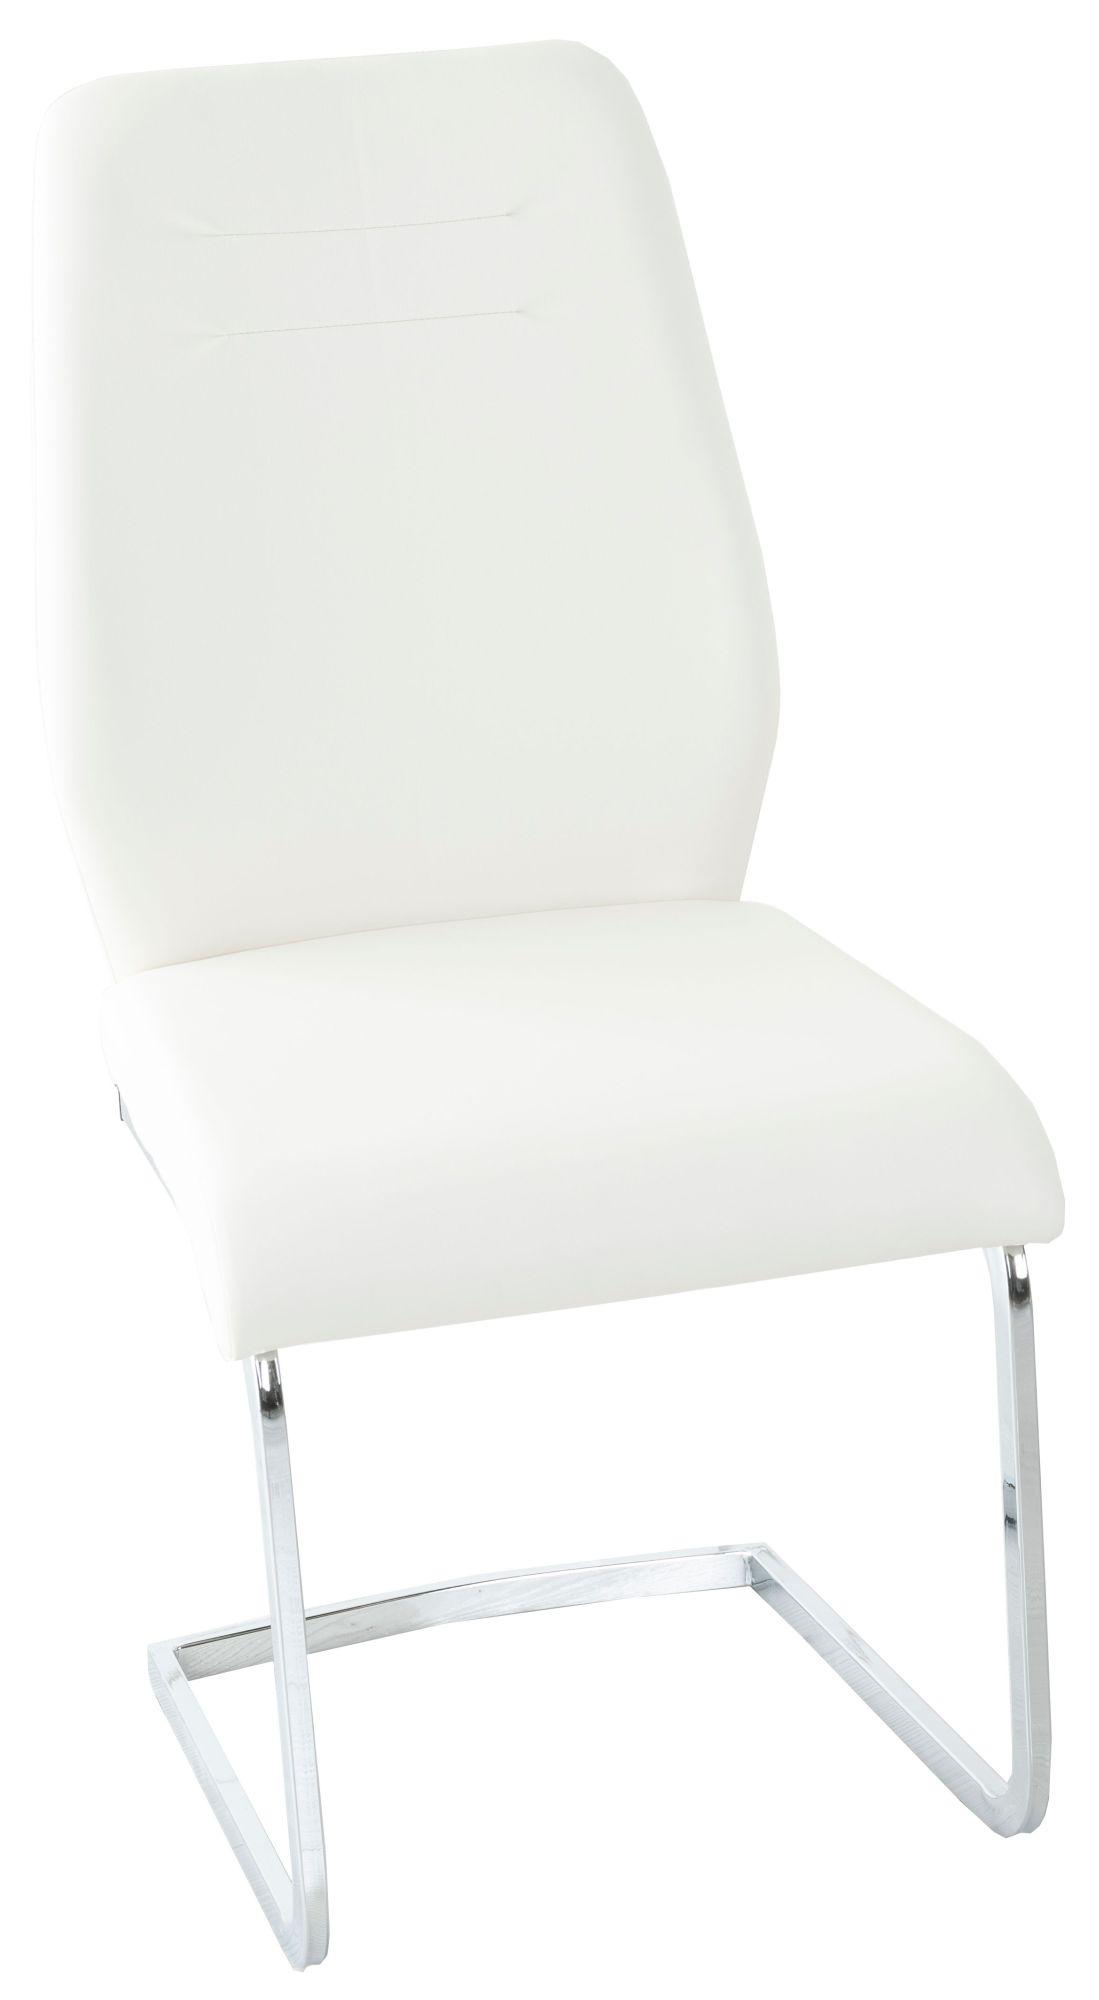 Oslo Cream Leather Dining Chair with Stainless Steel Cantiliver Base